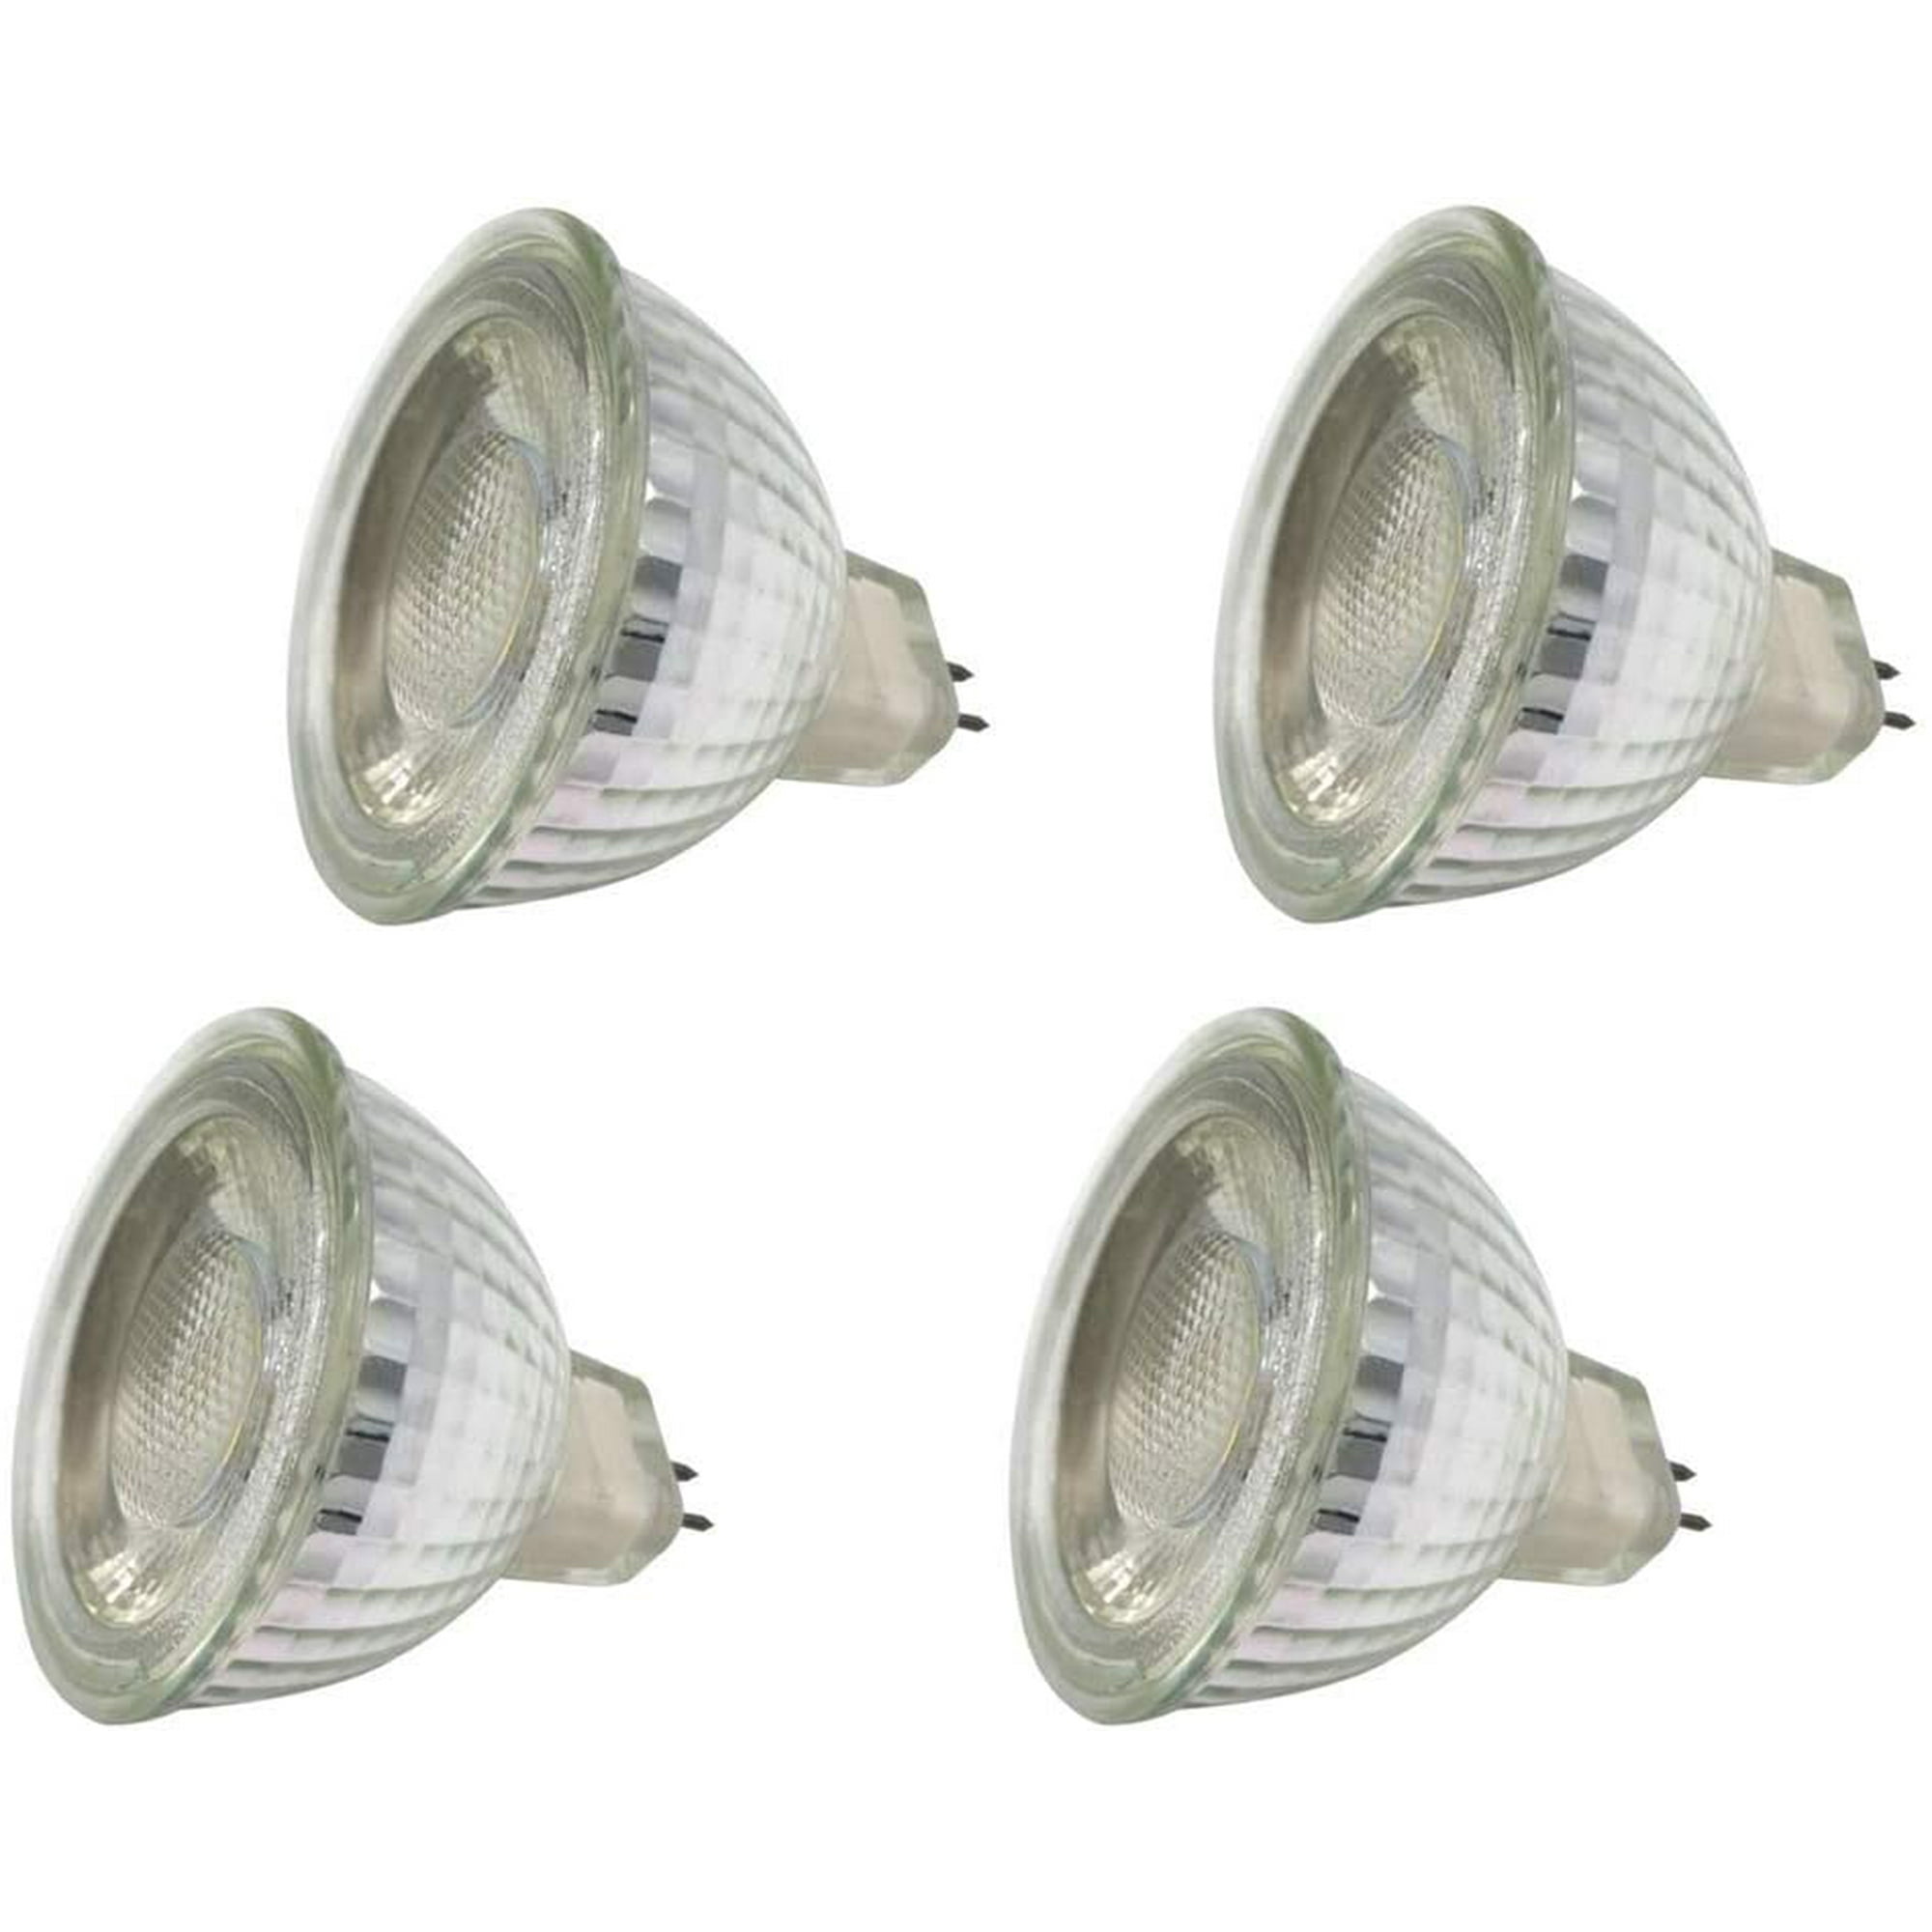 MR16 LED Bulbs 12V 5W(35W-50W Equivalent Halogen Replacement Bulbs) White LED Spotlight Bulbs for Indoor Landscape Track Recessed Bulbs,MR16 GU5.3 Bi-Pin Base,Non Dimmable,4 Pack | Walmart Canada